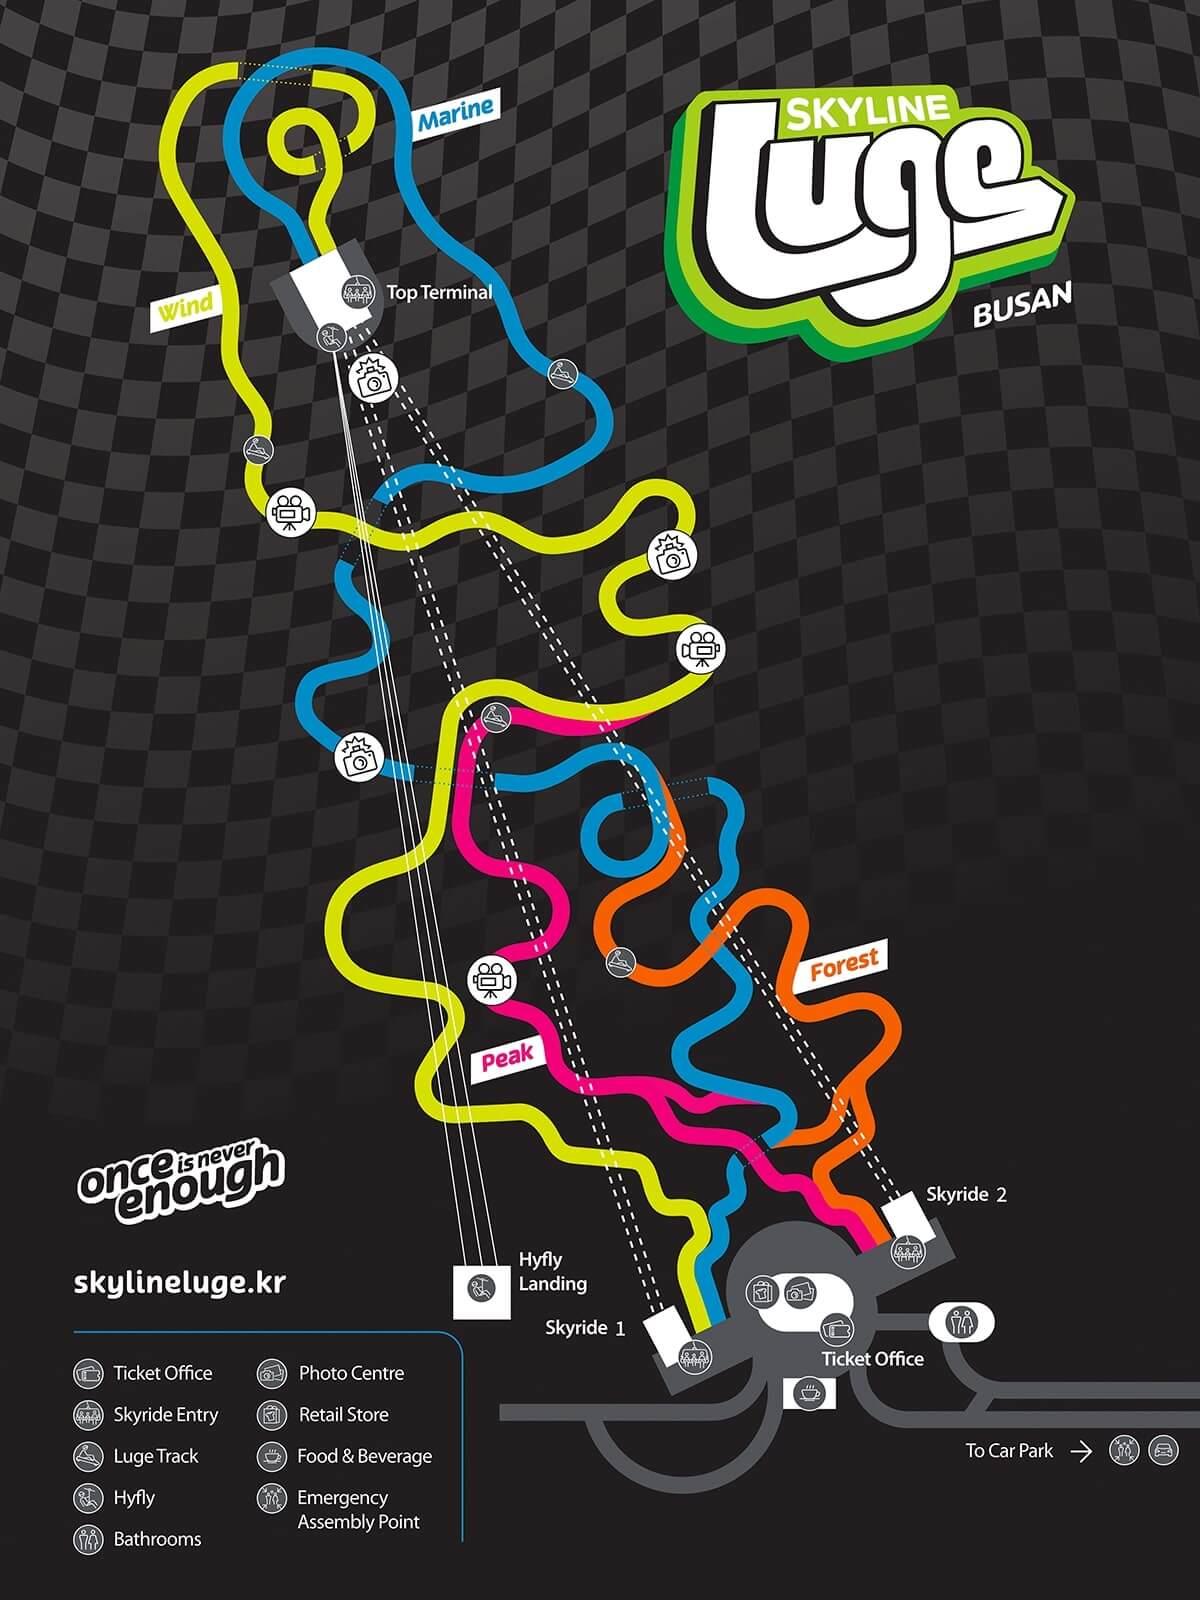 The Skyline Luge Busan track map.